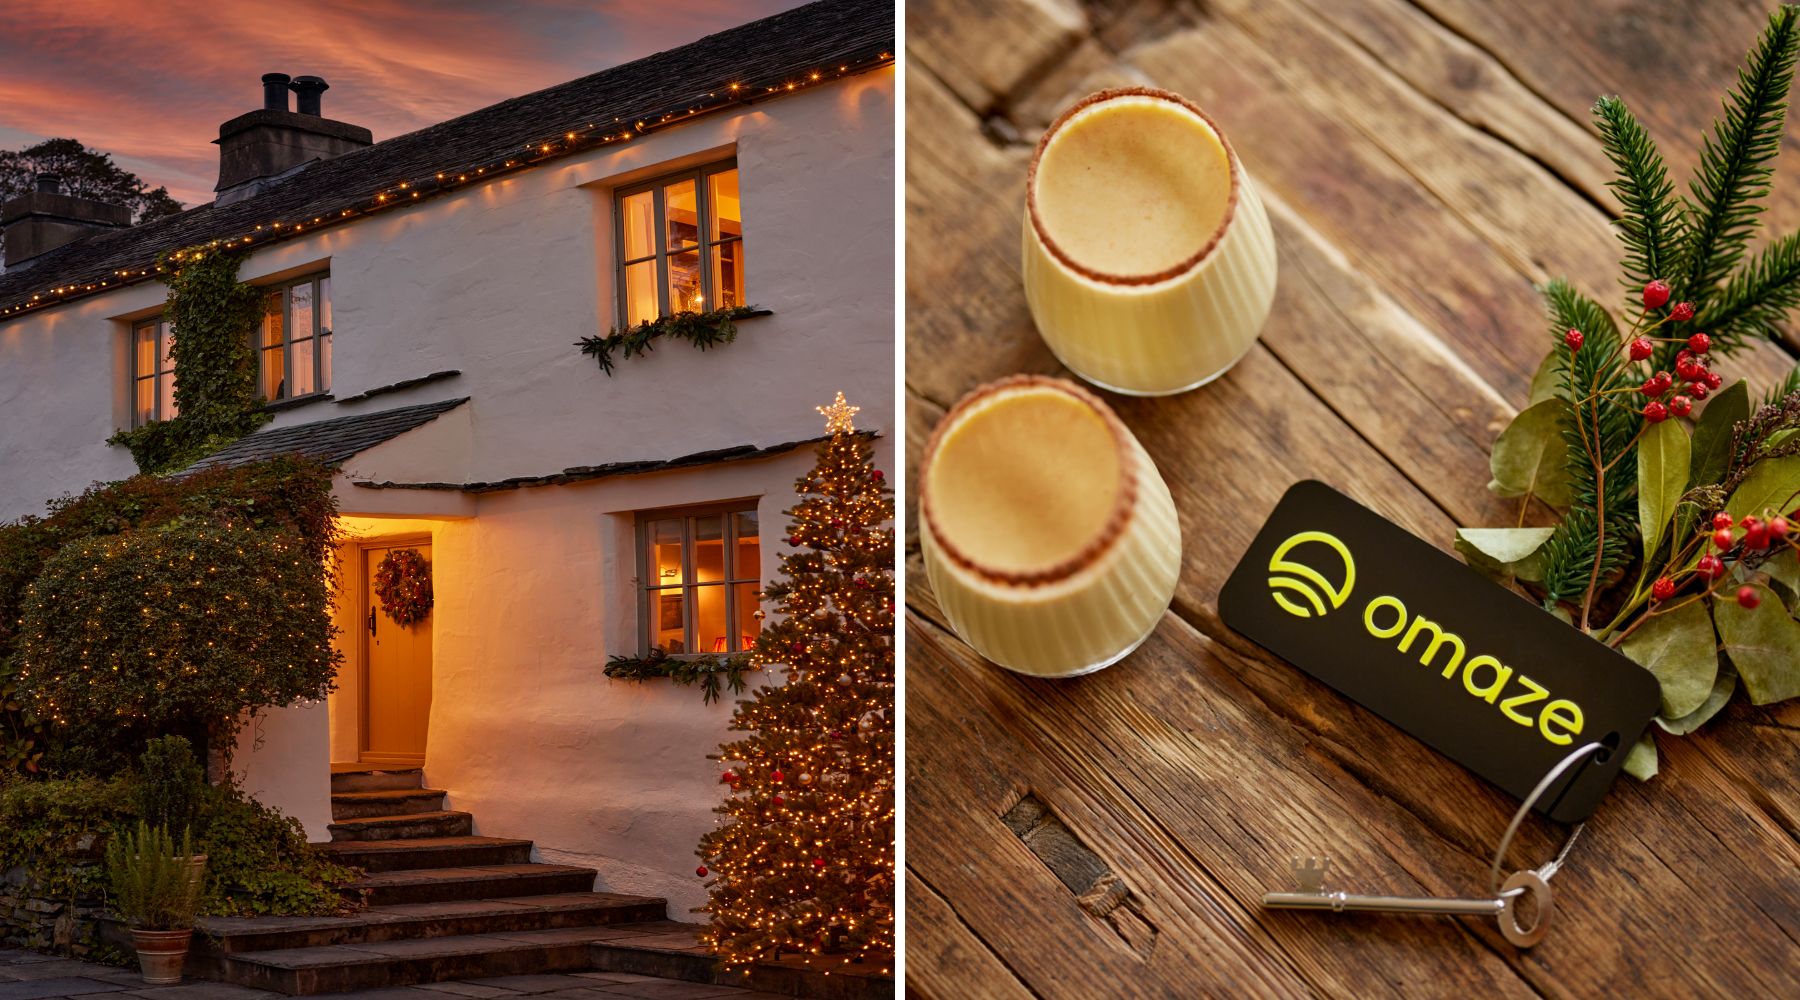 Omaze Million Pound House Lake District - House porch in the sunset with fairy lights around the window. Rustic table with key and Omaze keyring, Christmas foliage and  two glasses of egg nog 